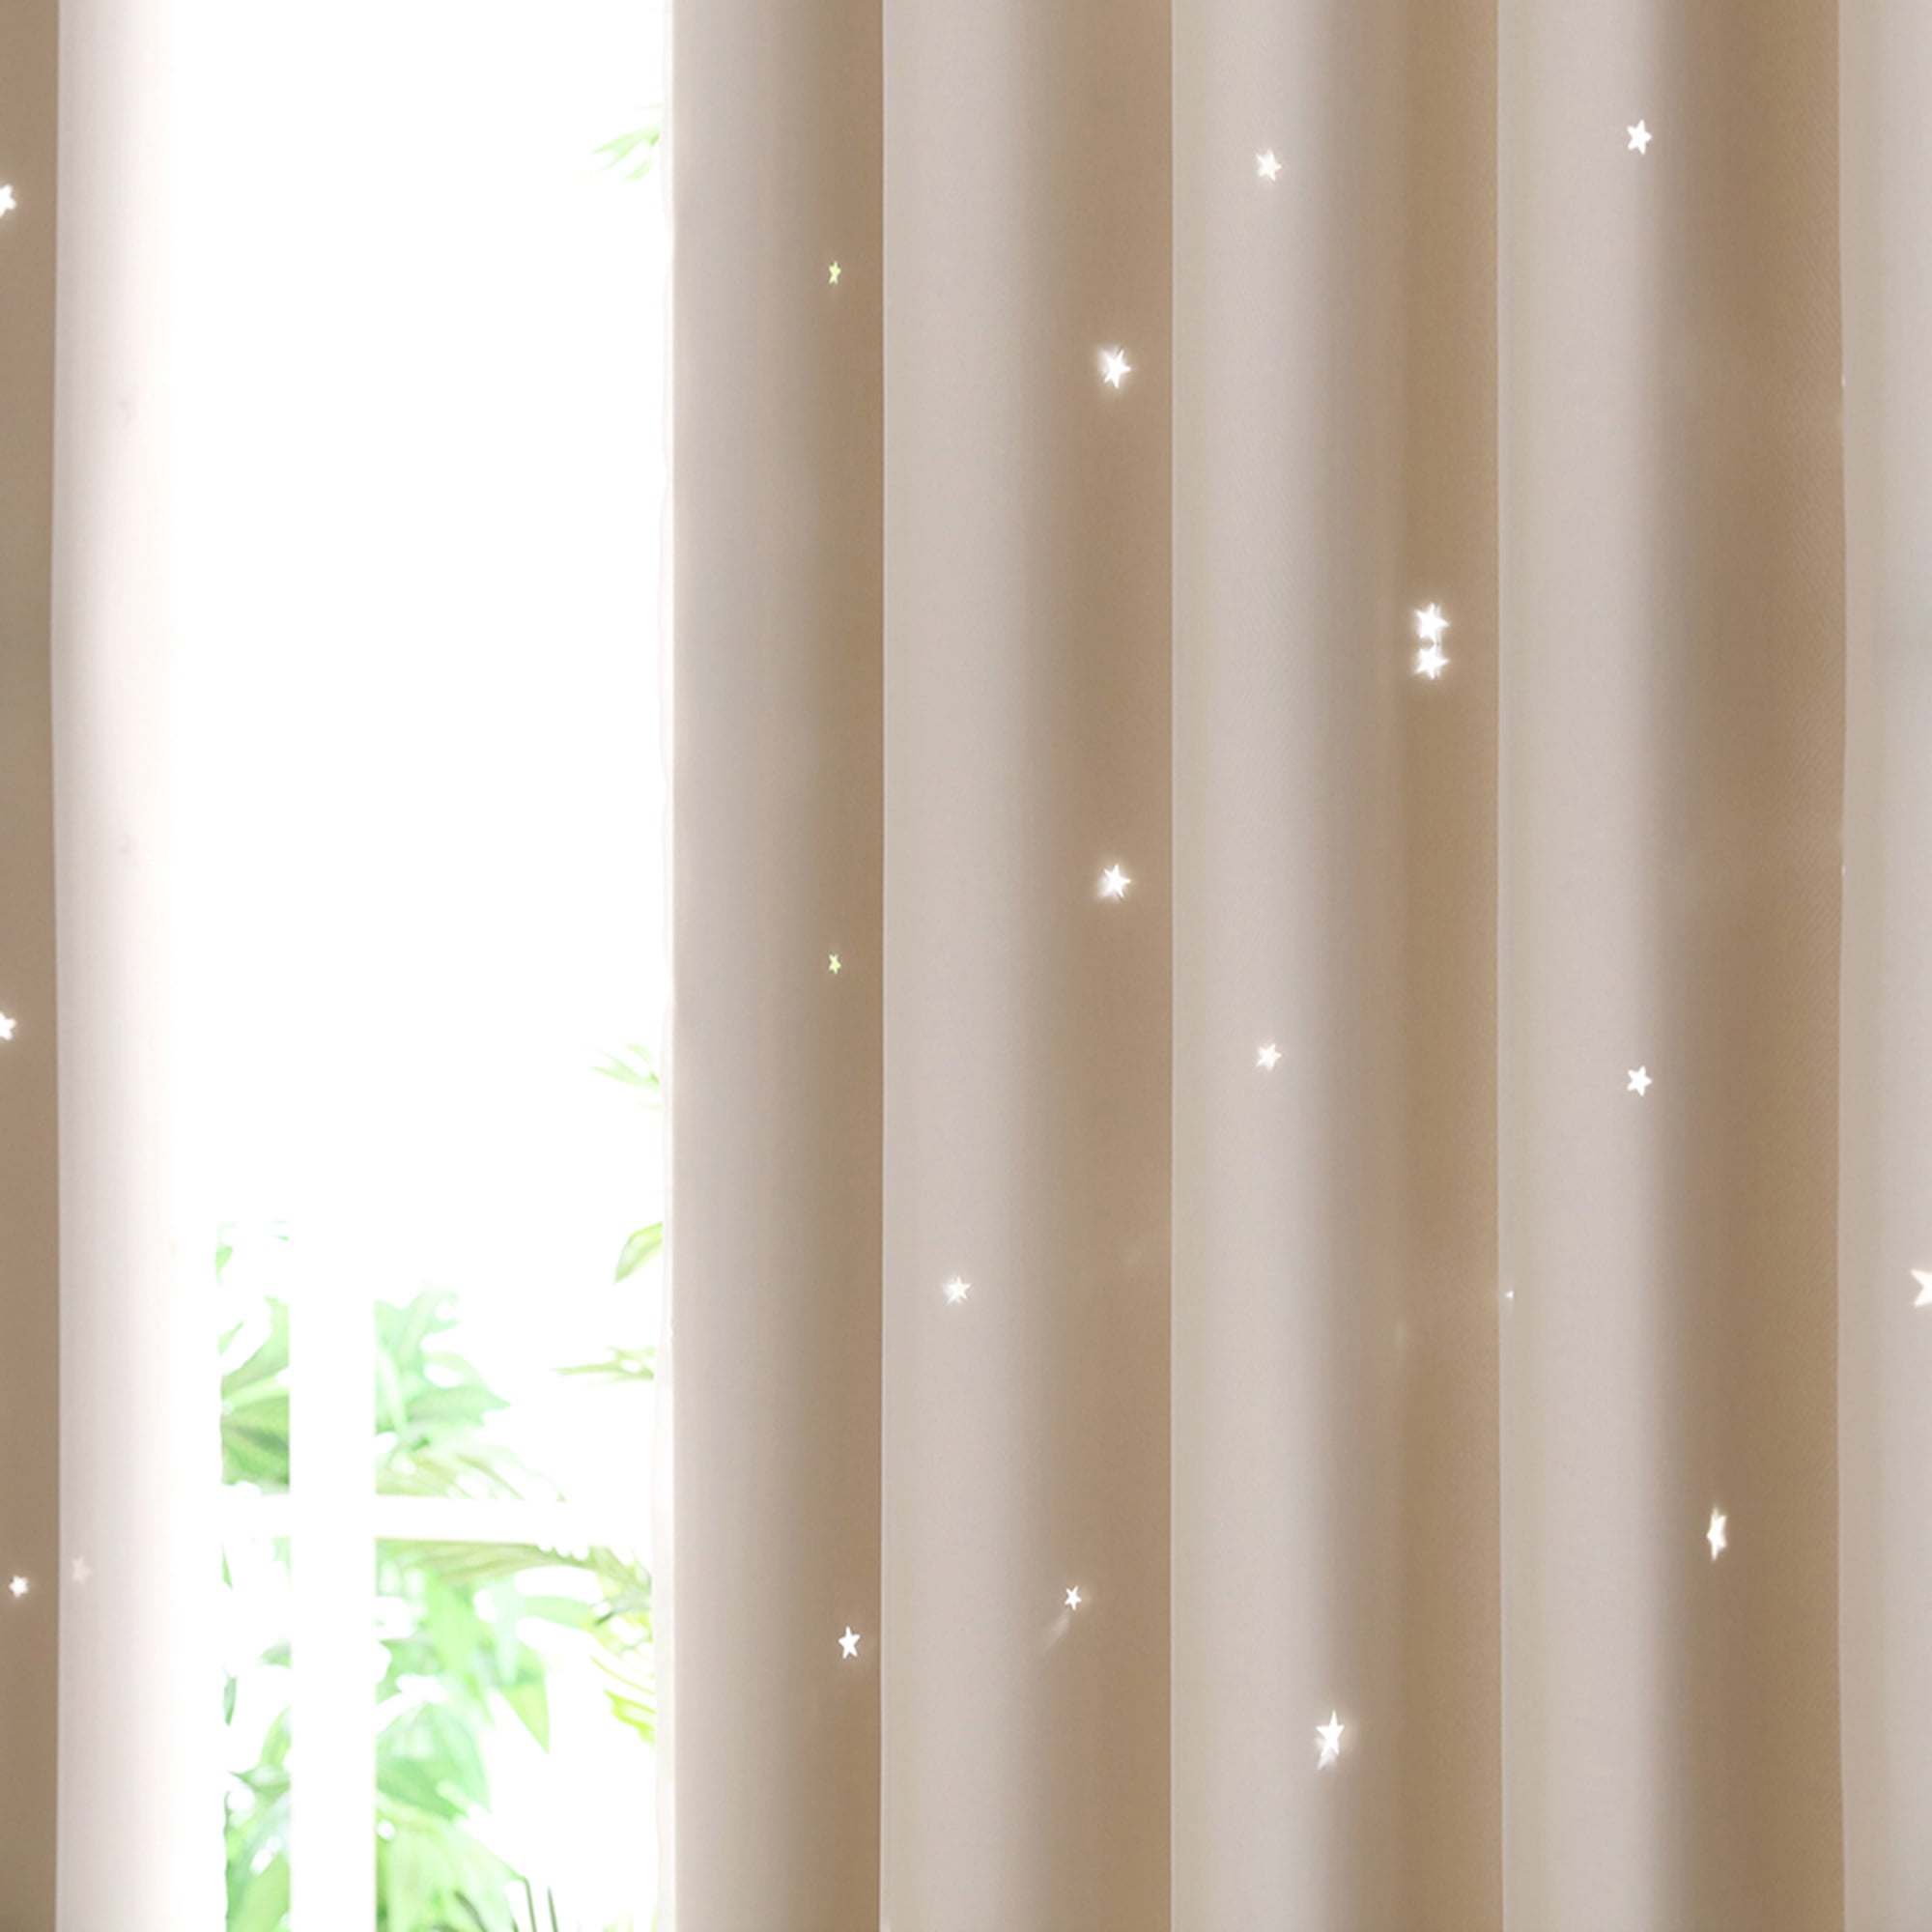  1pcs,Double Layer Window Curtains-Shade Cut Out Stars Panel and  Gauze Valance with Eyelet Top Colorful Blackout Curtain Voile Sheer Curtain  Panel for Kids Girls Bedroom Living Room,Multicolour : Everything Else